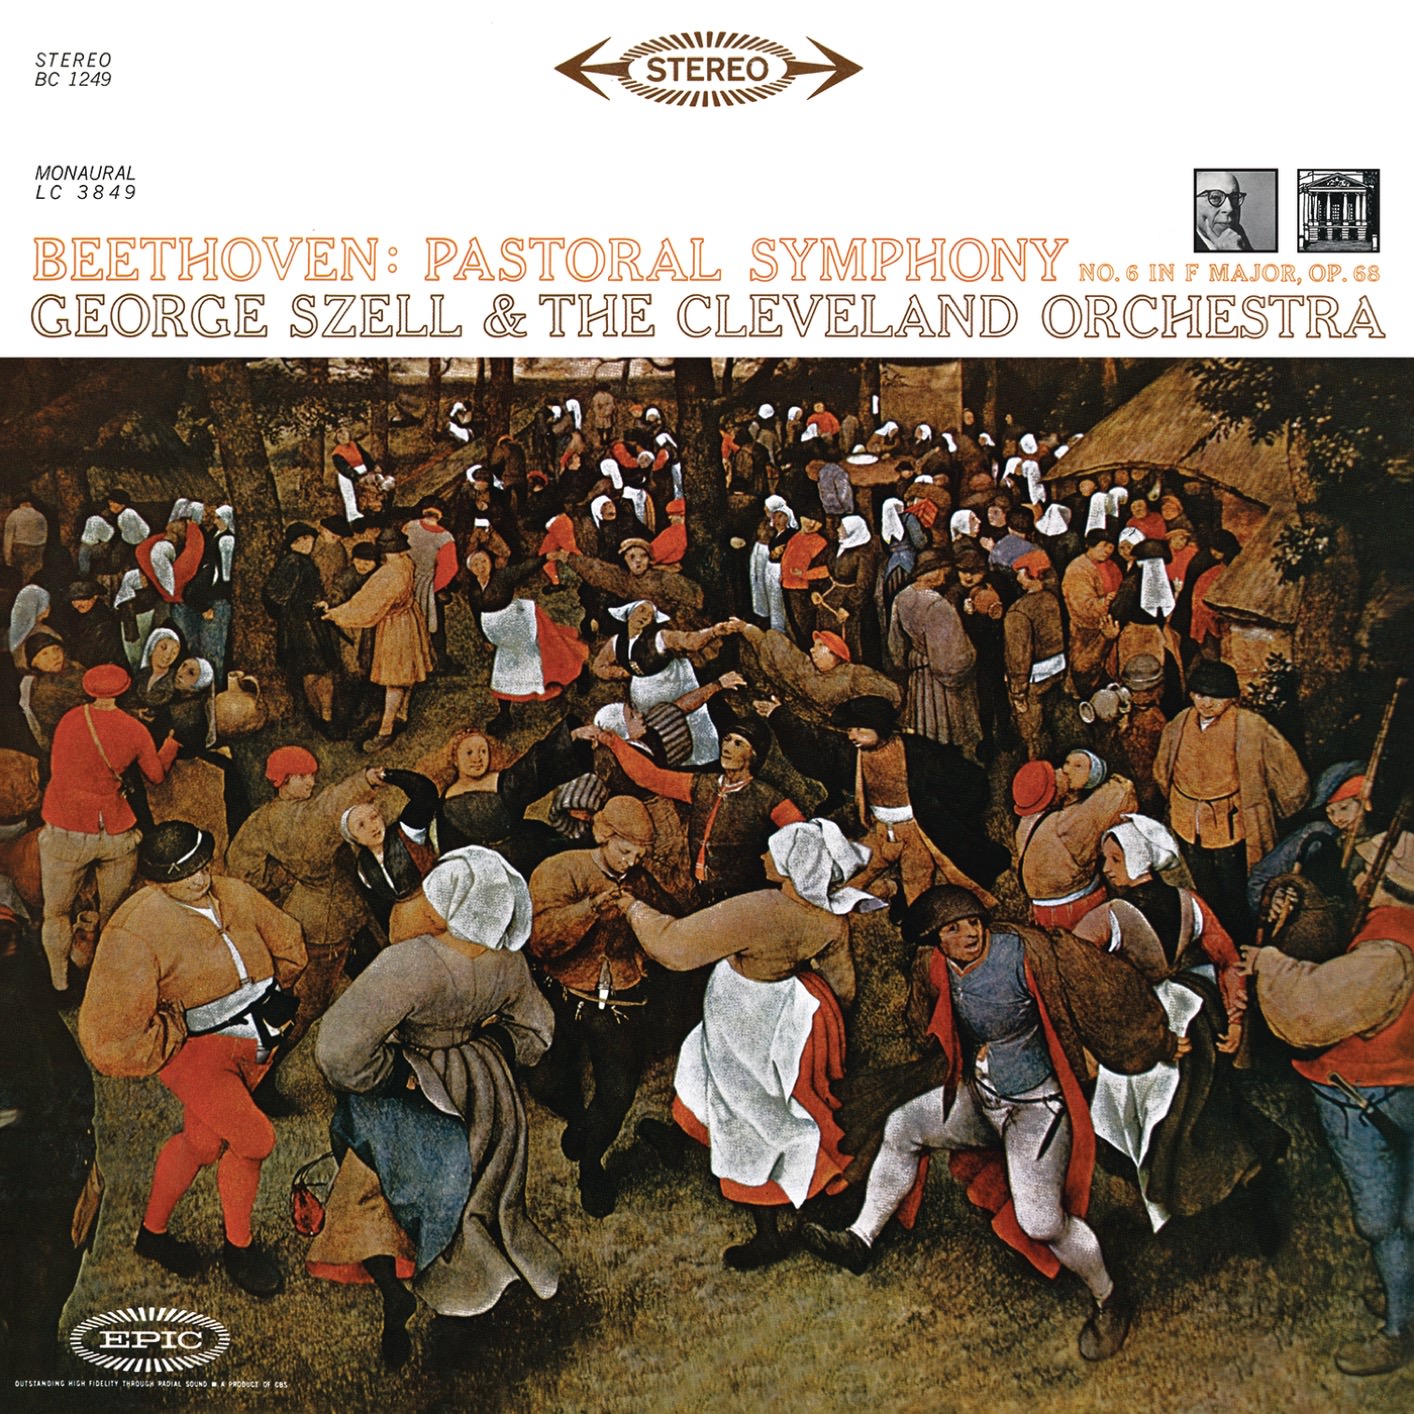 George Szell - Beethoven: Symphony No. 6 in F Major, Op. 68 "Pastoral" (1962/2018) [FLAC 24bit/192kHz]